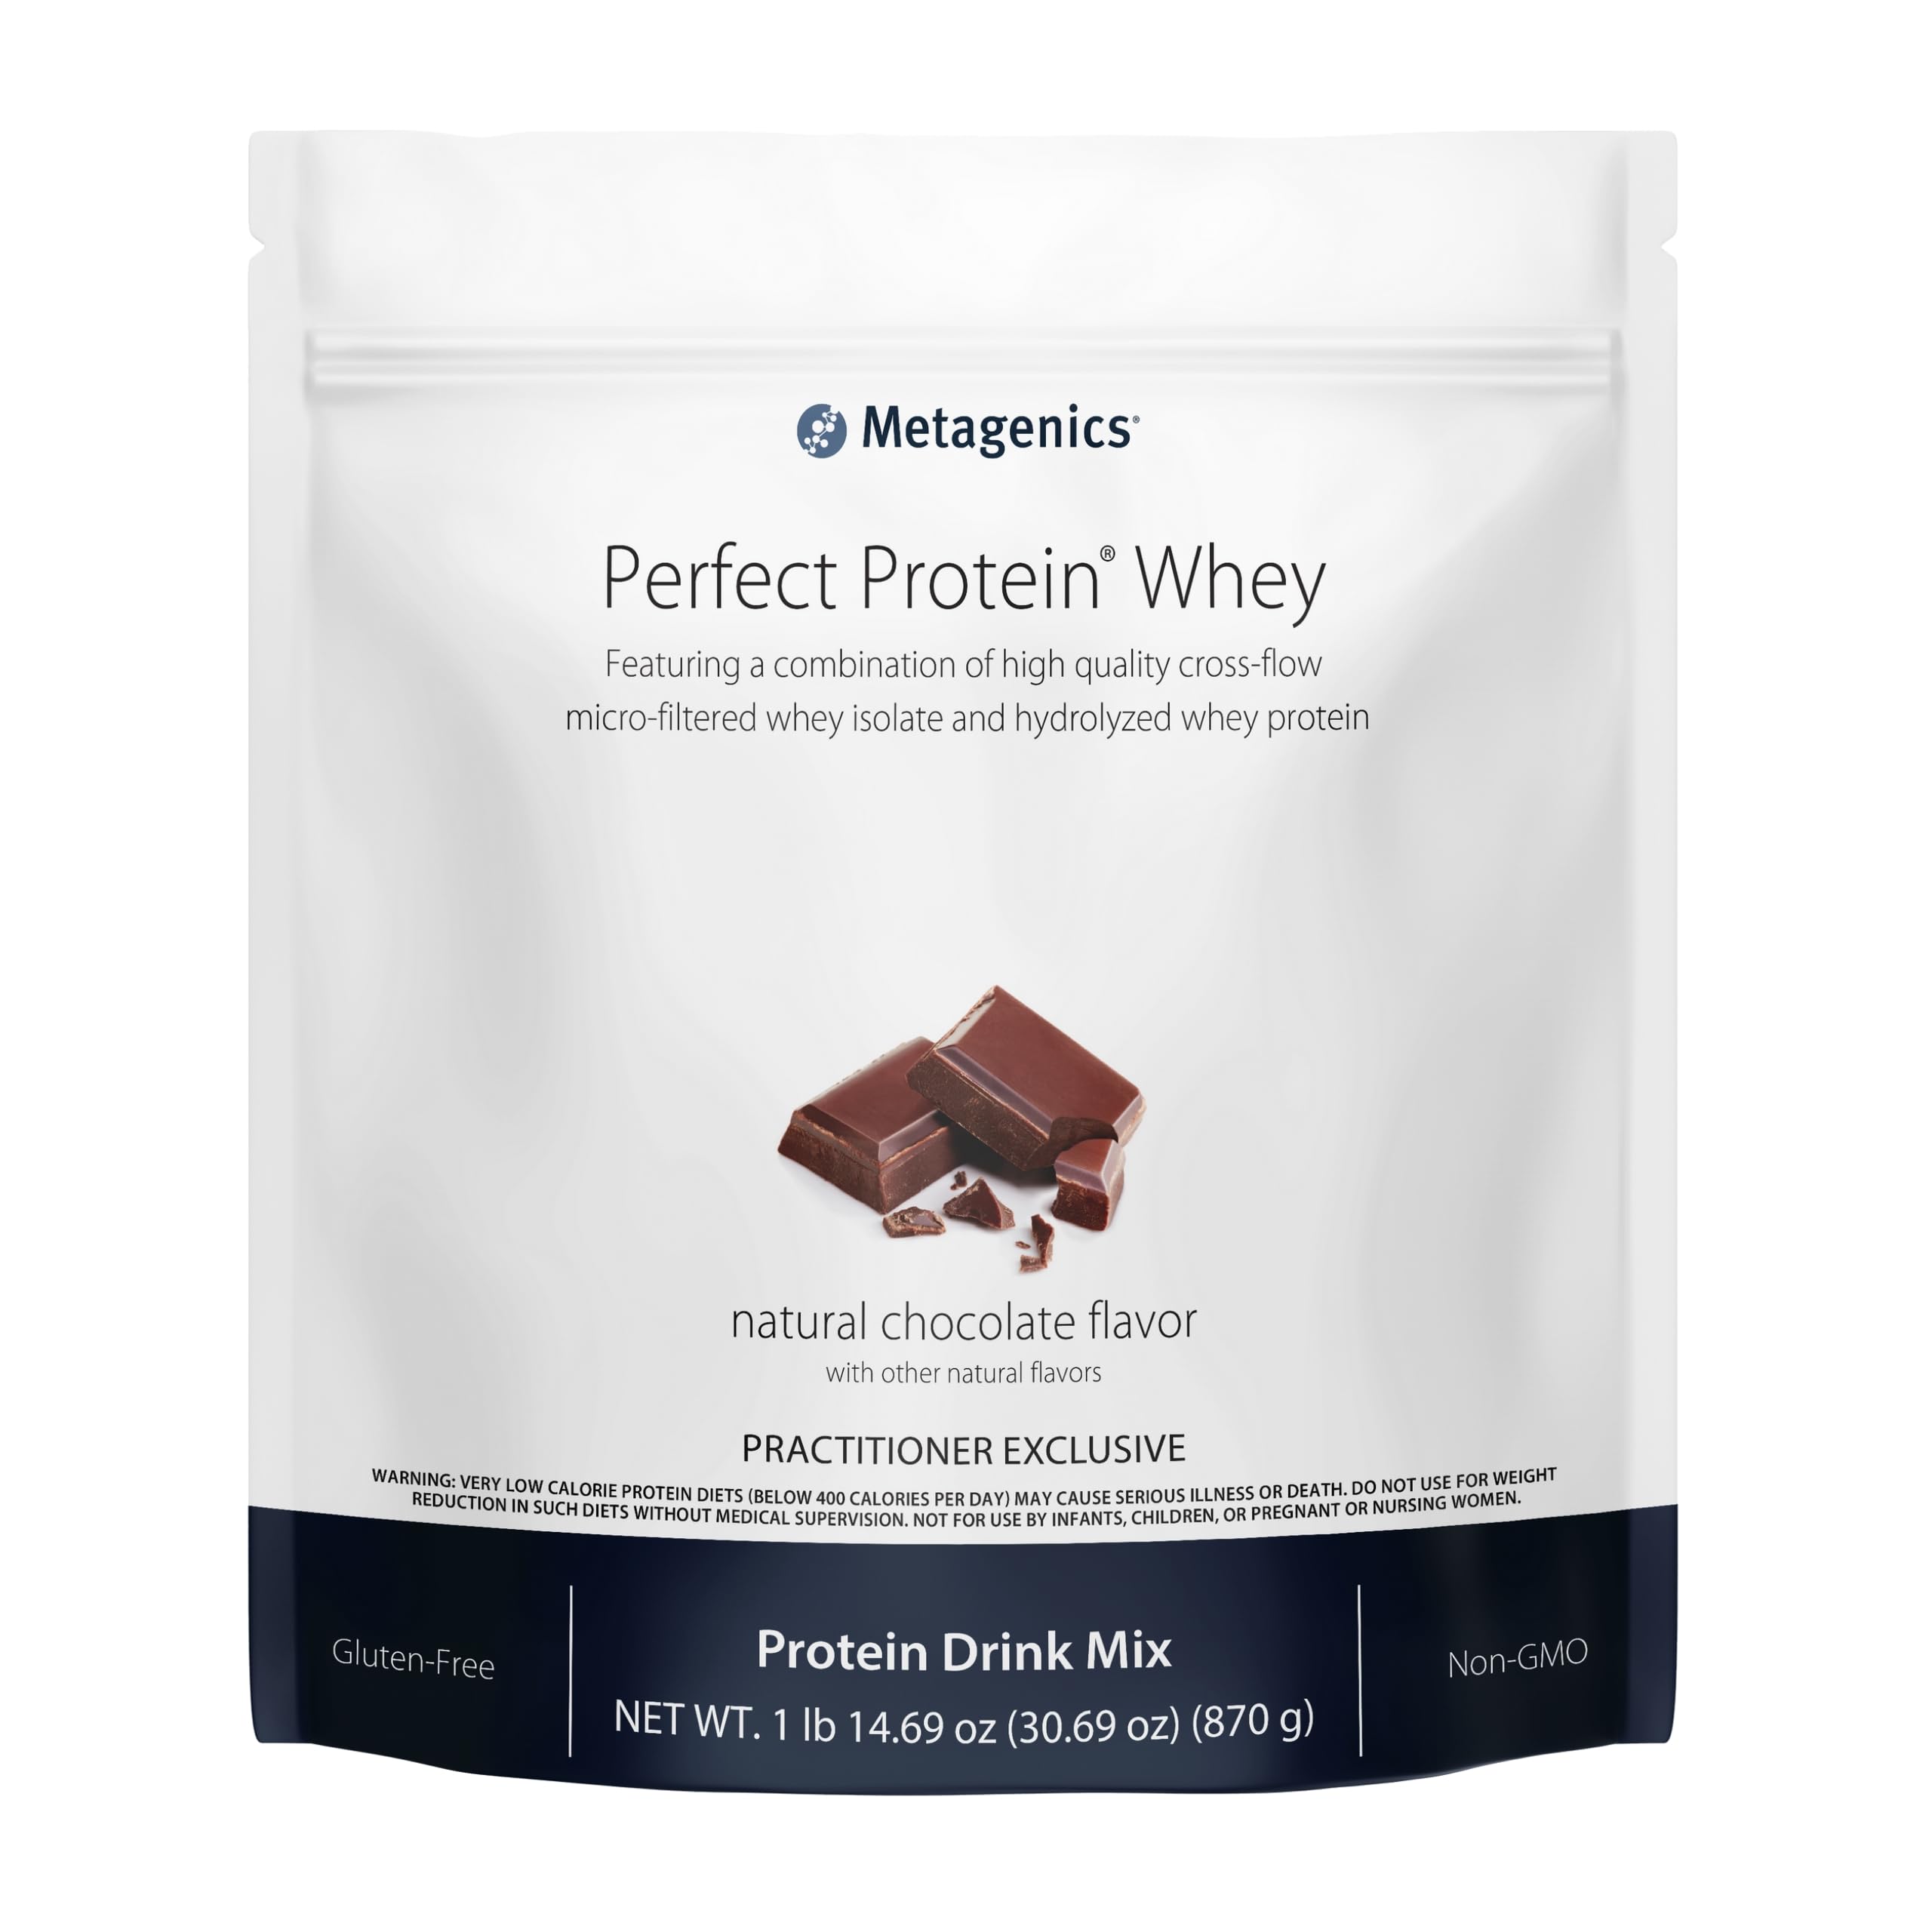 Metagenics Perfect Protein Whey Chocolate Flavor - 30 Servings